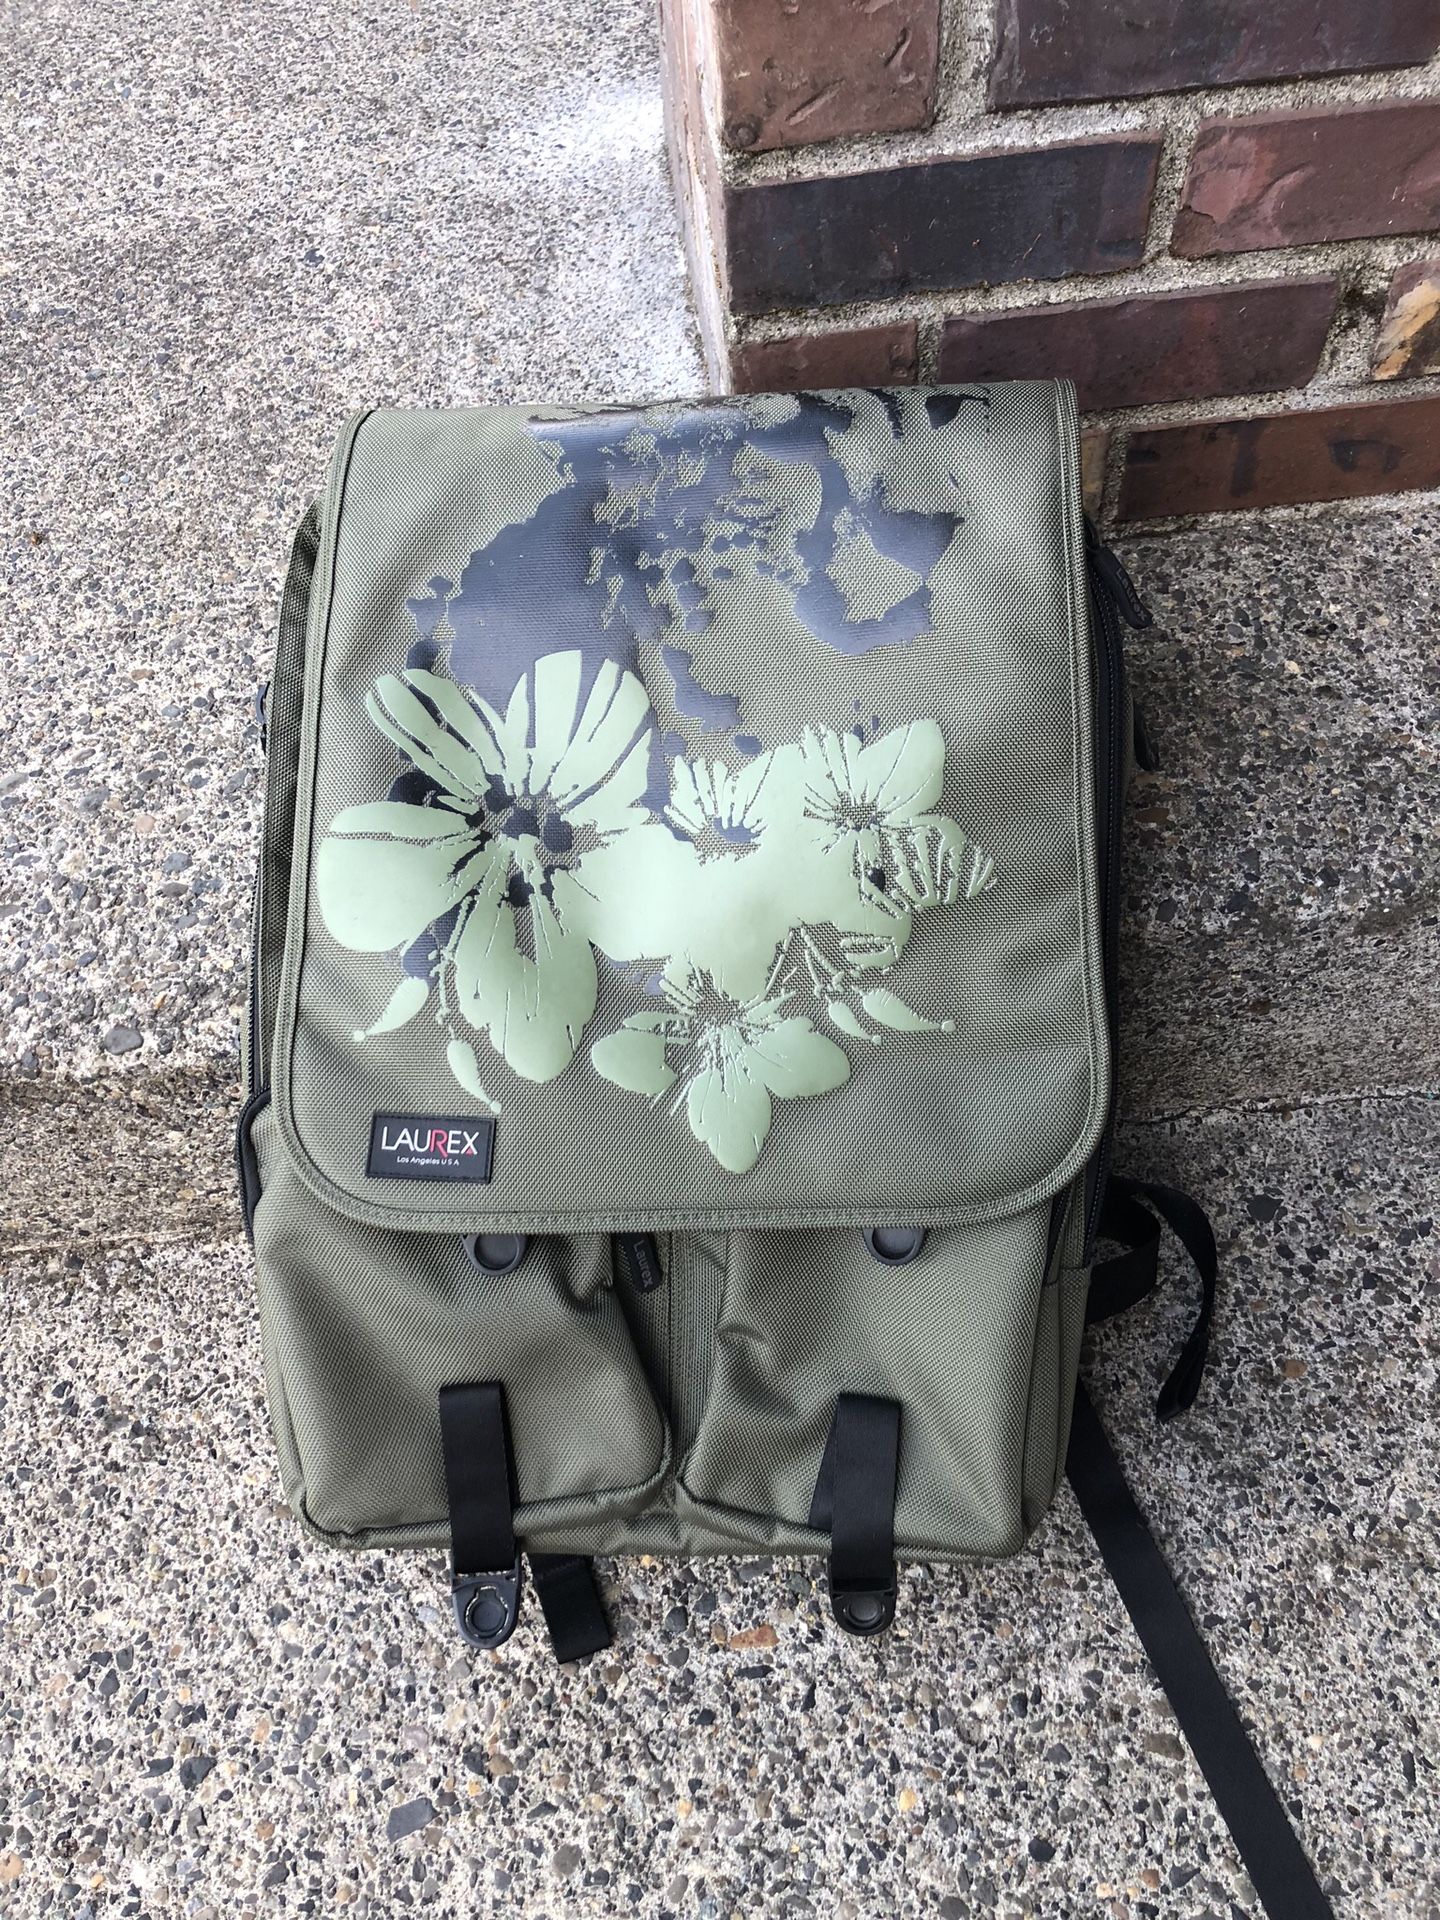 Laptop Backpack - New